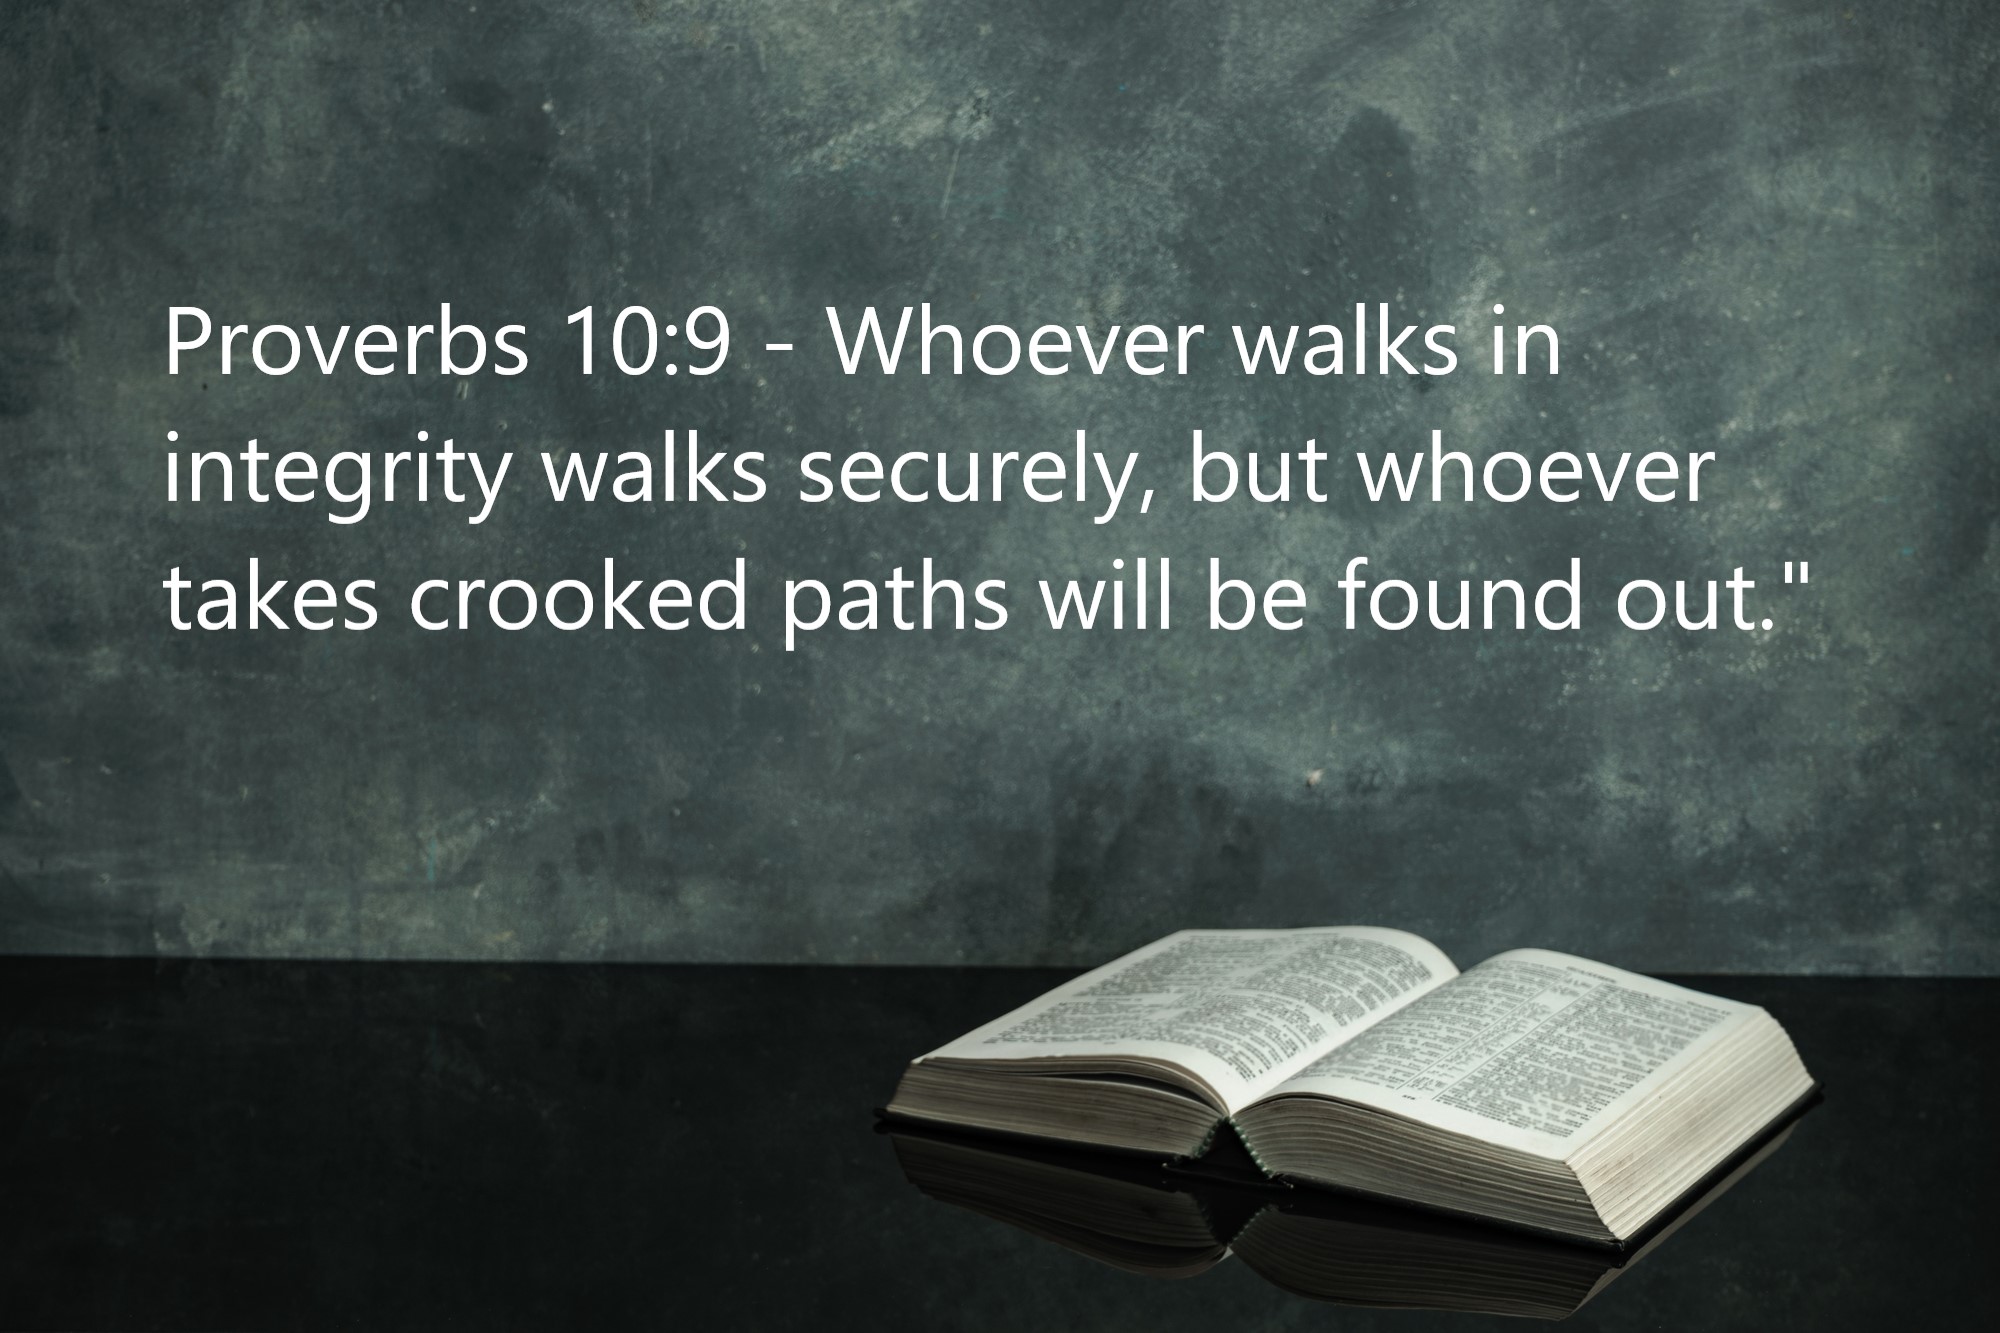 Proverbs 10:9: "Whoever walks in integrity walks securely, but whoever takes crooked paths will be found out."